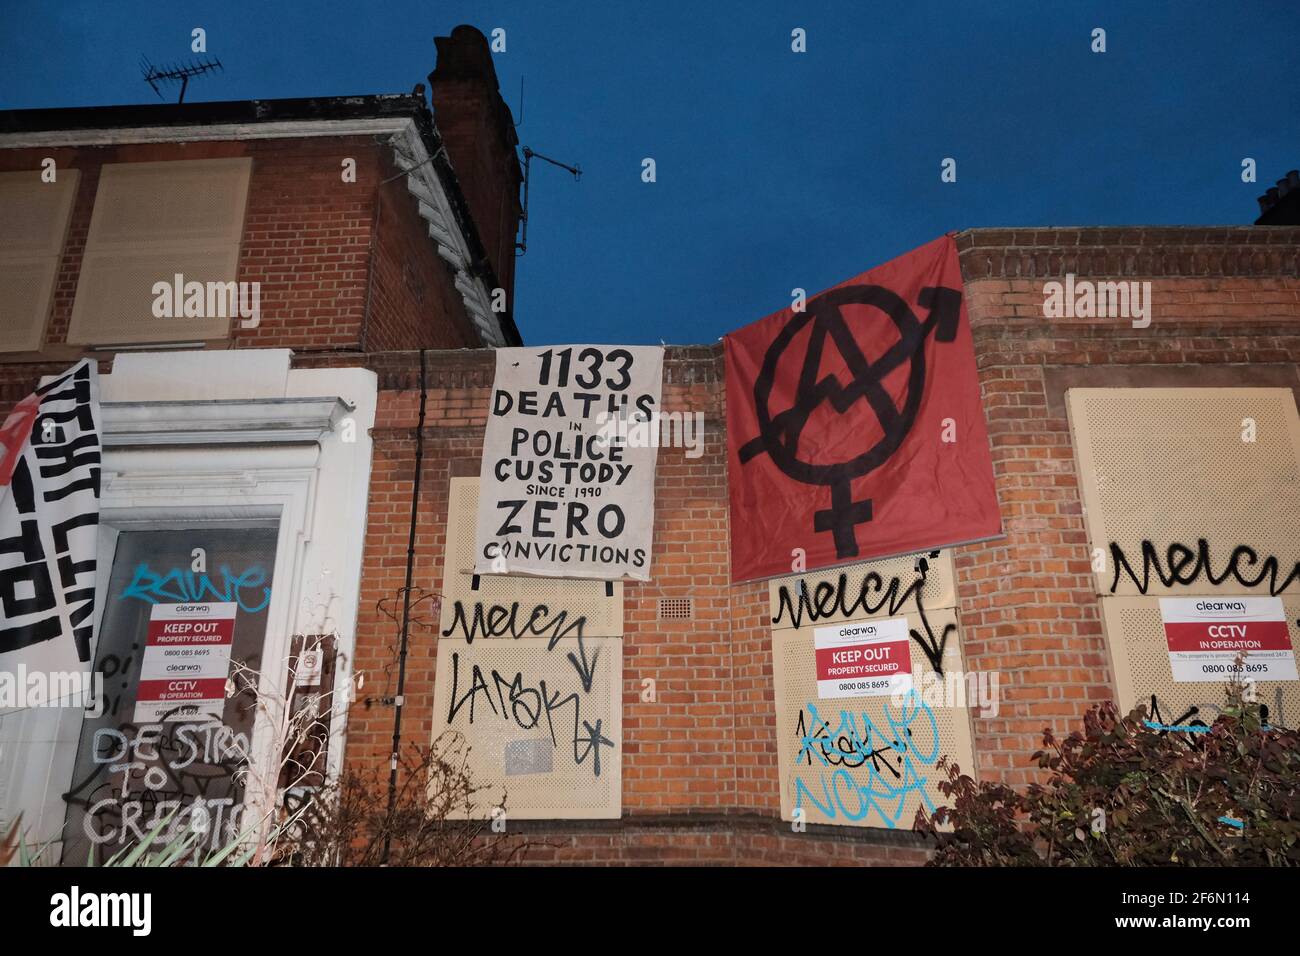 An anarchist group occupies a former police station close to where Sarah Everard was last seen in Clapham Common in protest against female violence. Stock Photo